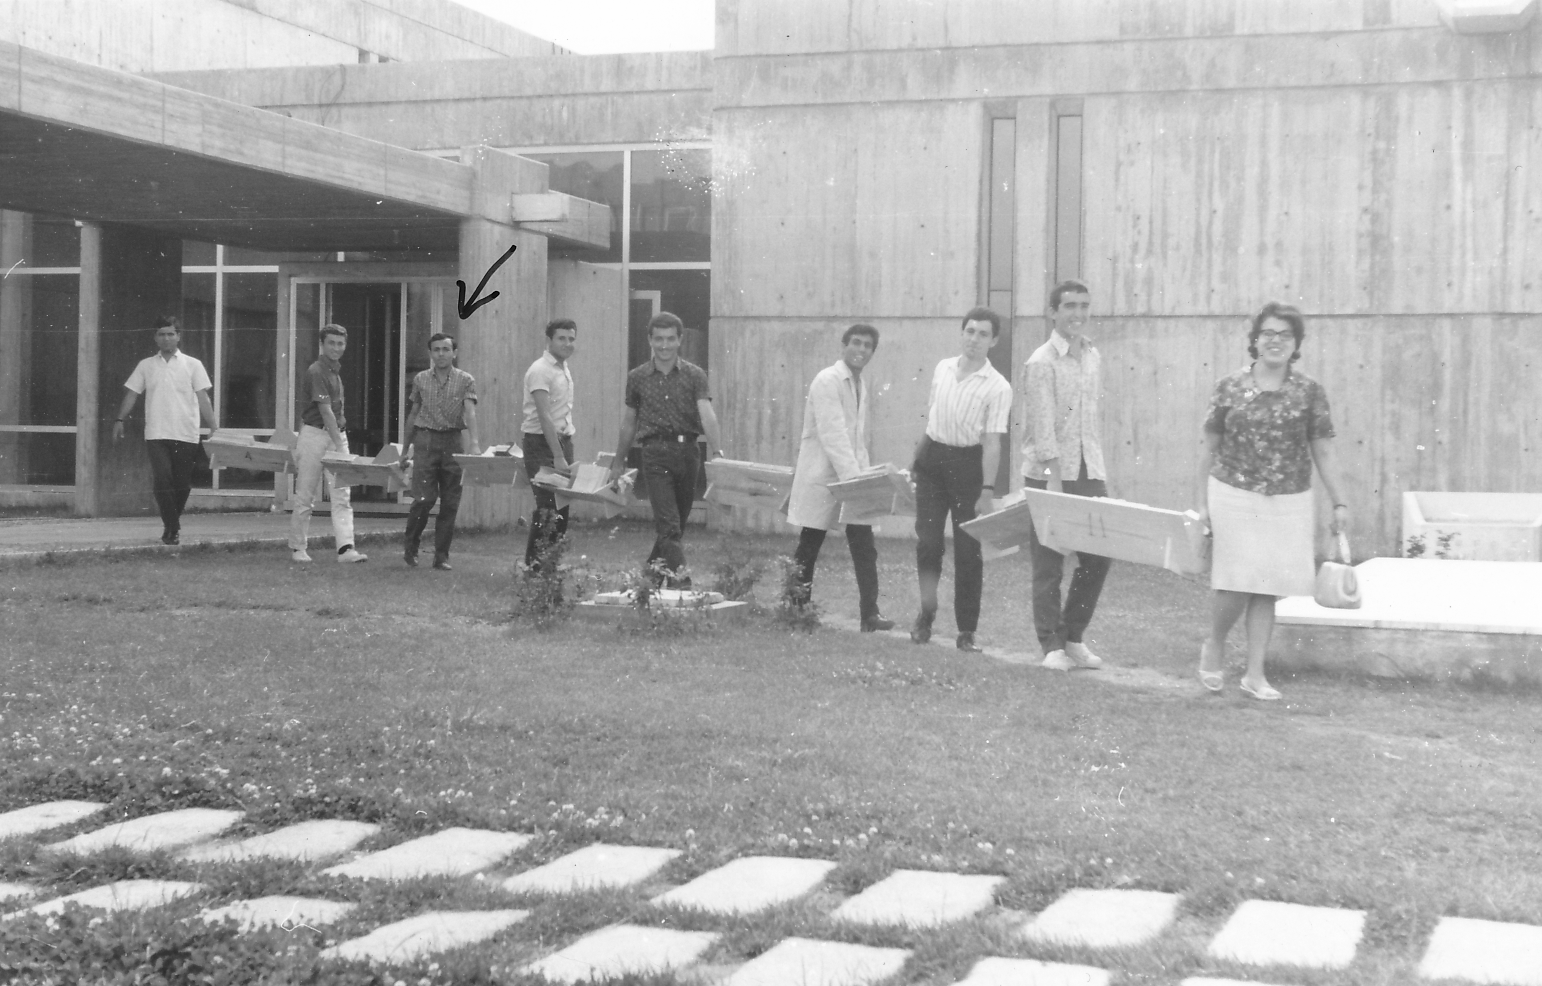 Students carrying books to the new library building (1967)